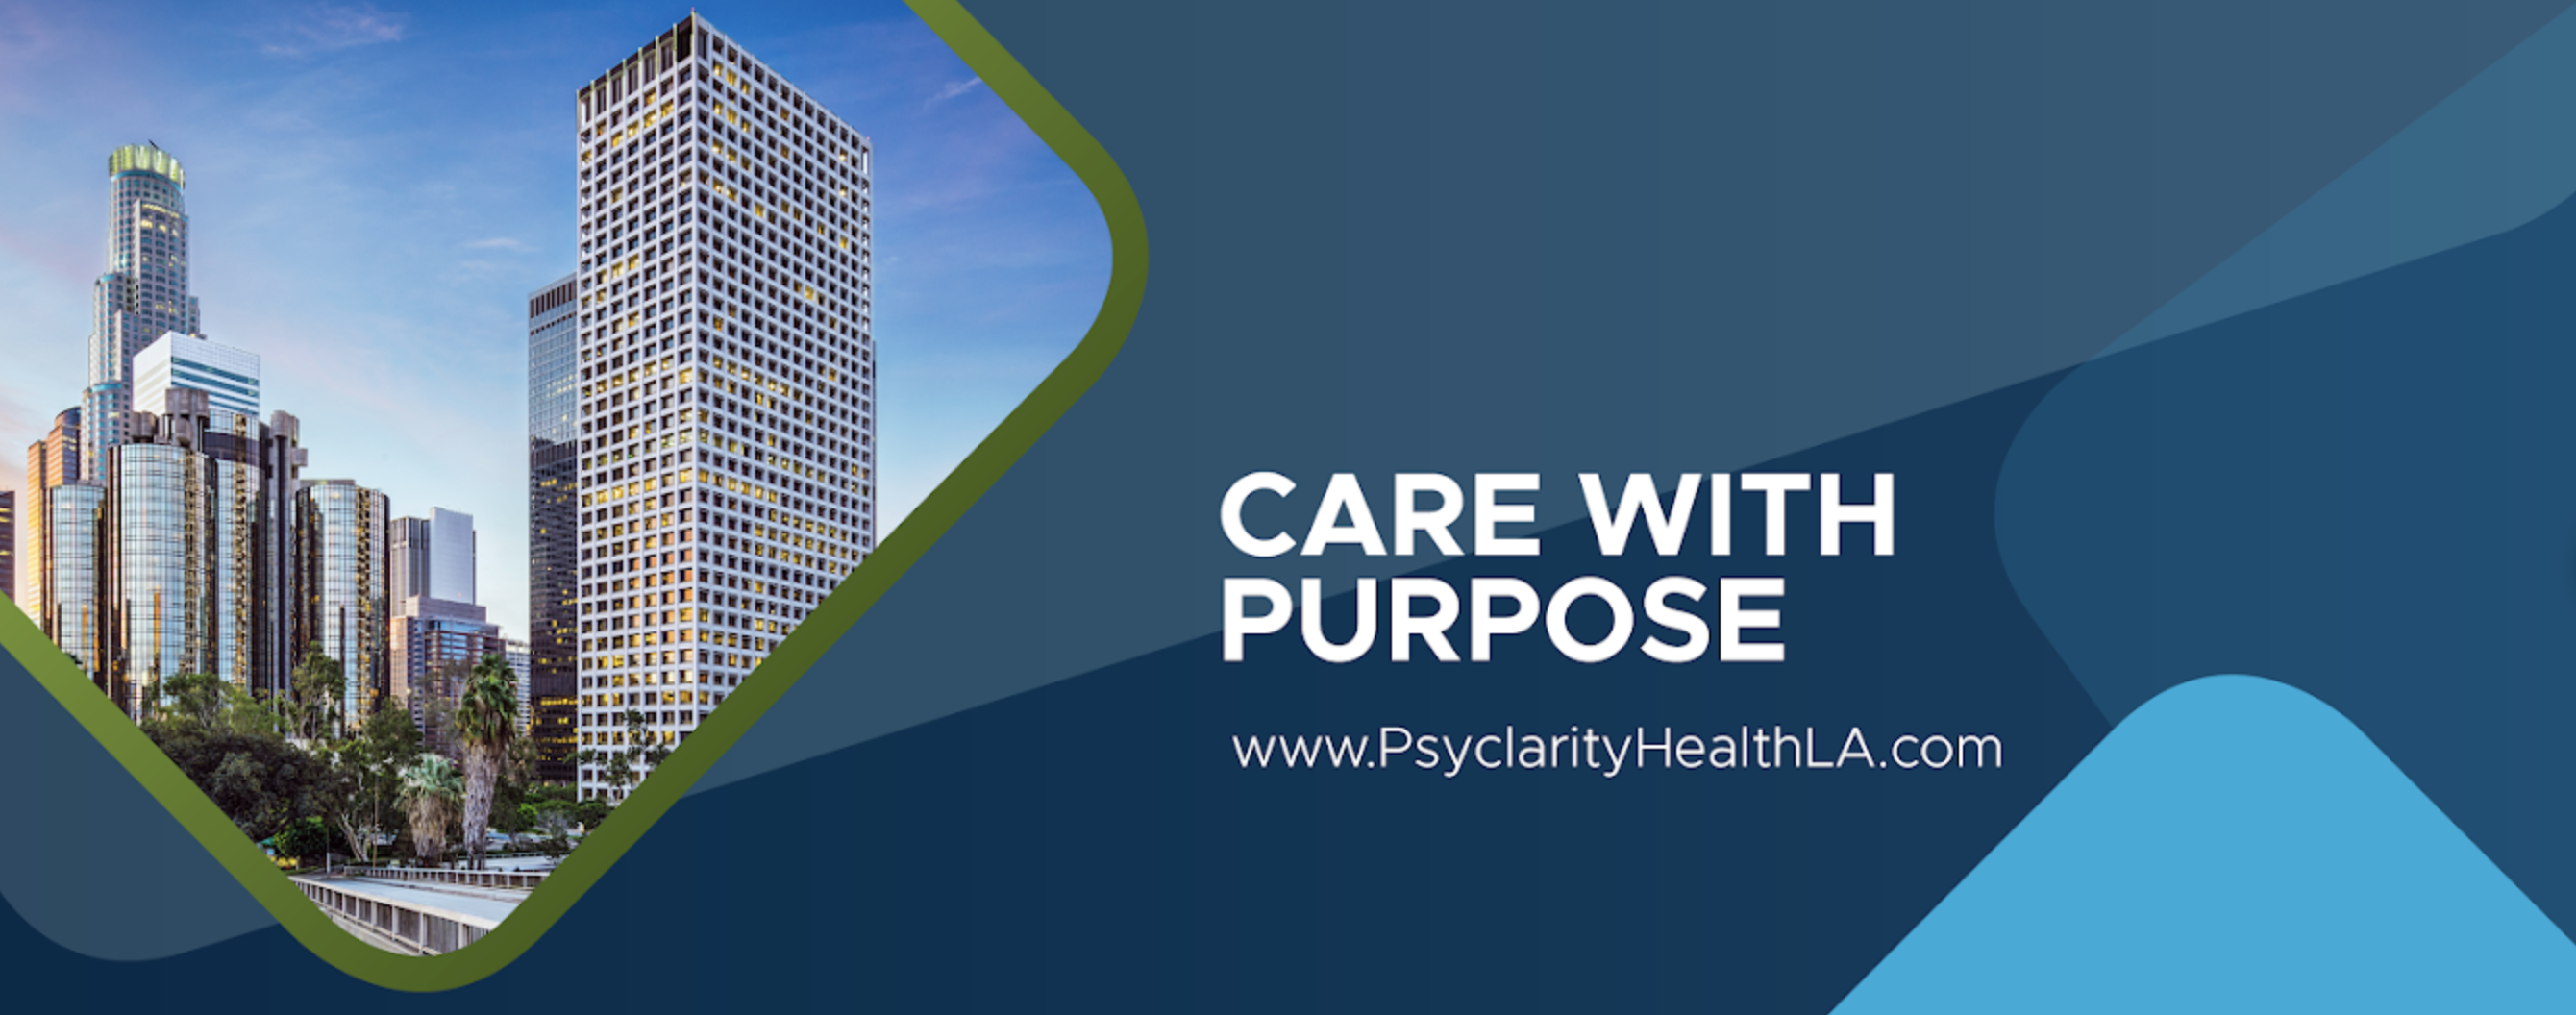 Psyclarity Health is a Premier Detox and Rehab Treatment Facility in California